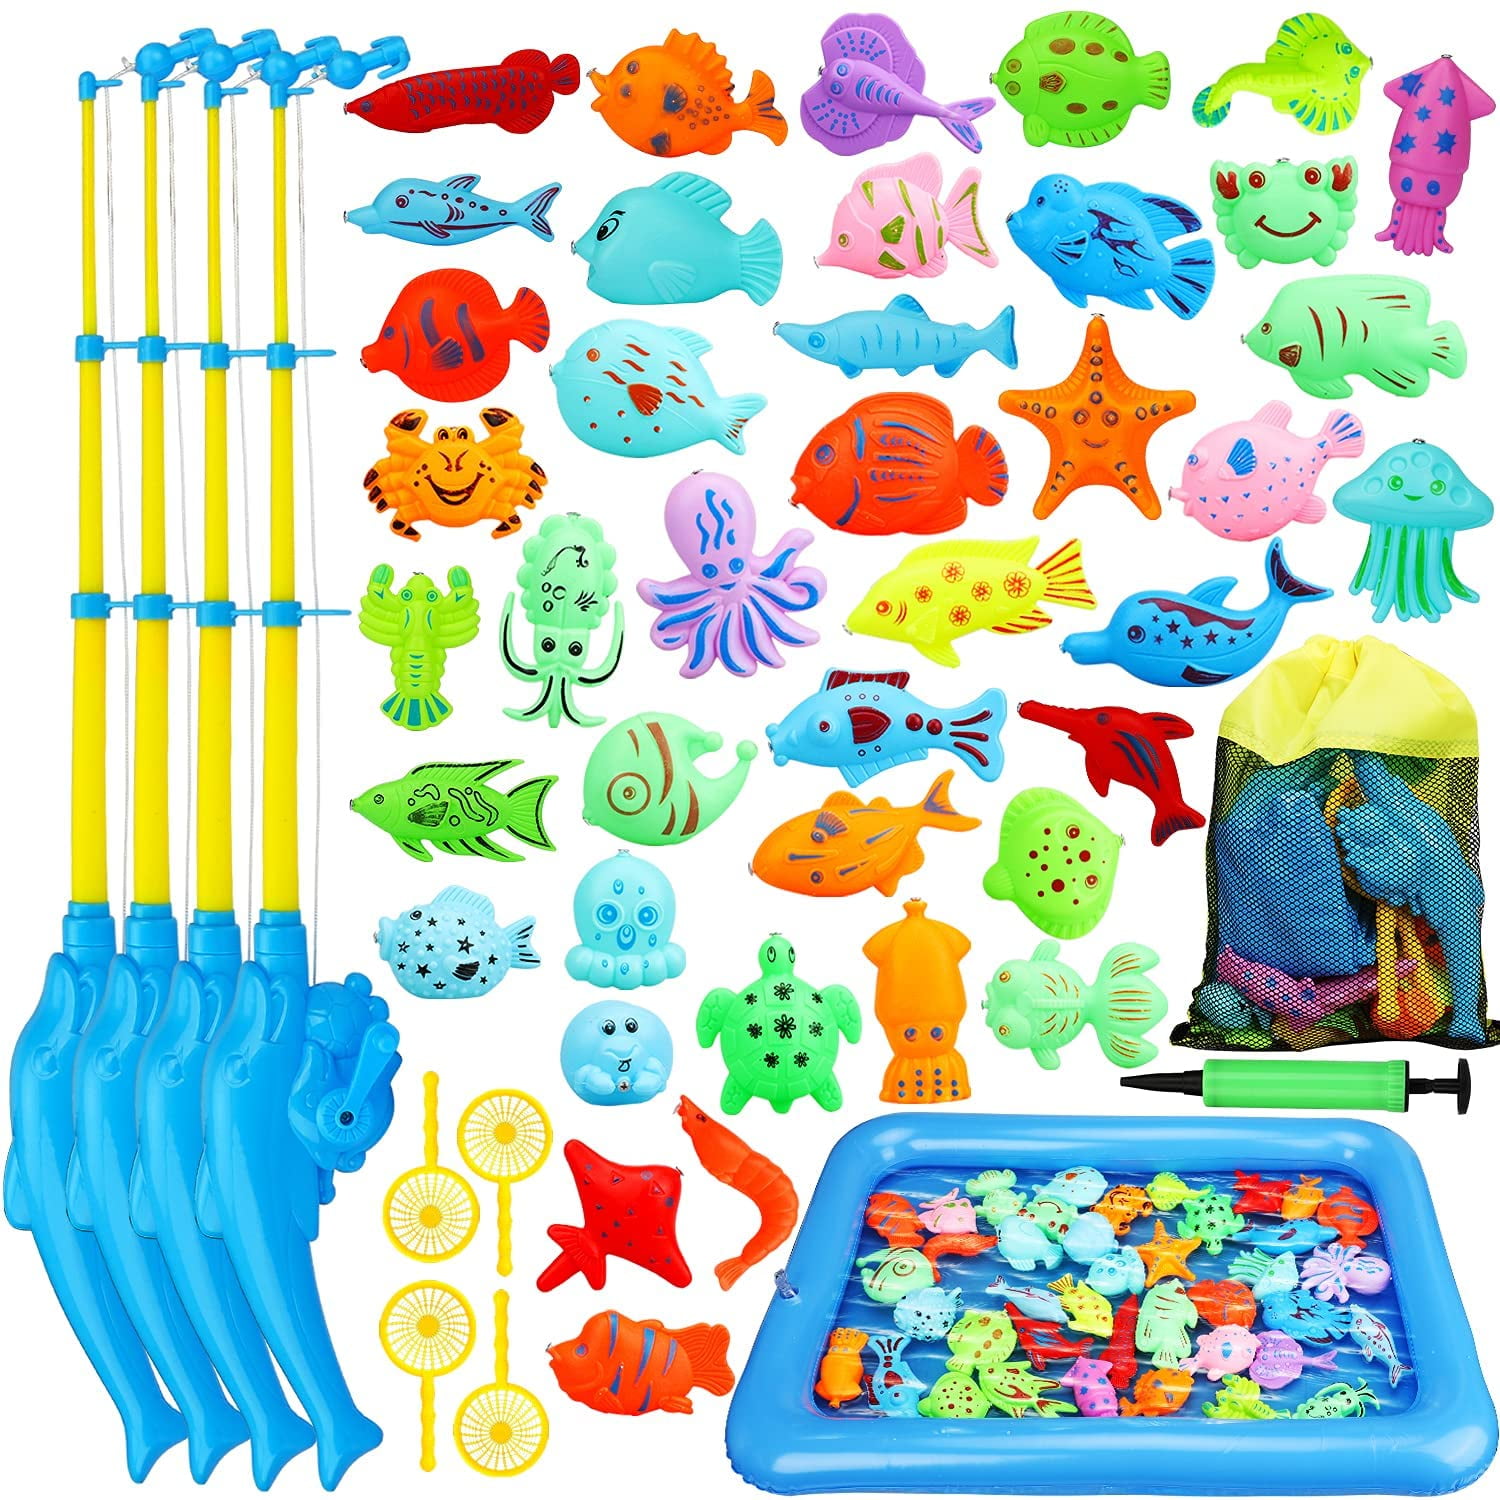 Smart Novelty, Strong Magnetic Fishing Game for Kids - Bath Pool